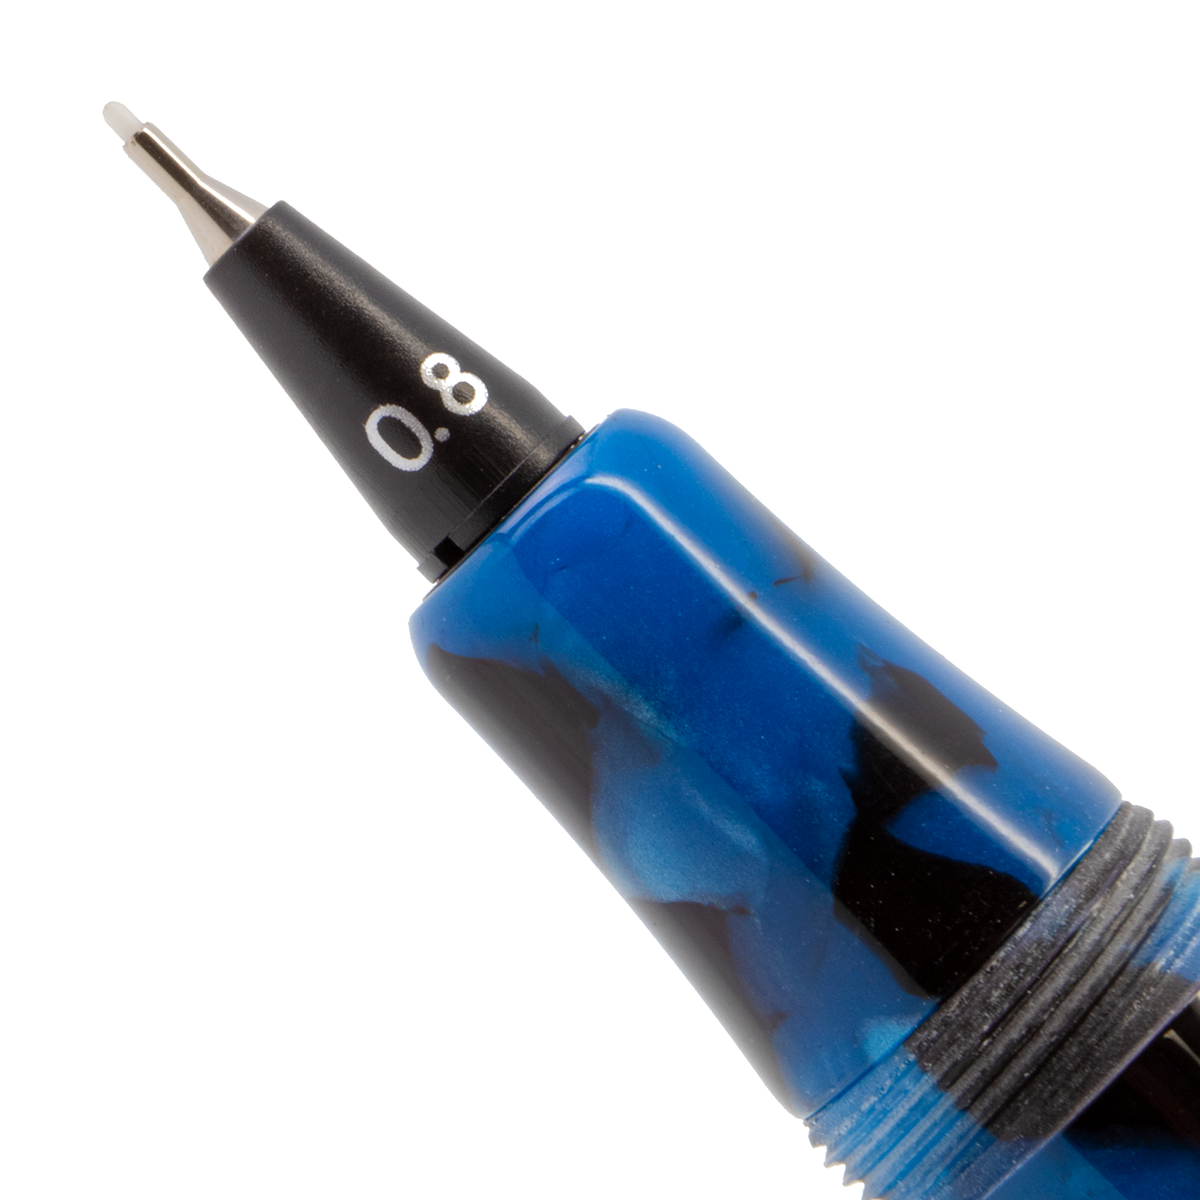 Yookers Front Section for Gaia Fiber Pen Blue/Black Marble Resin